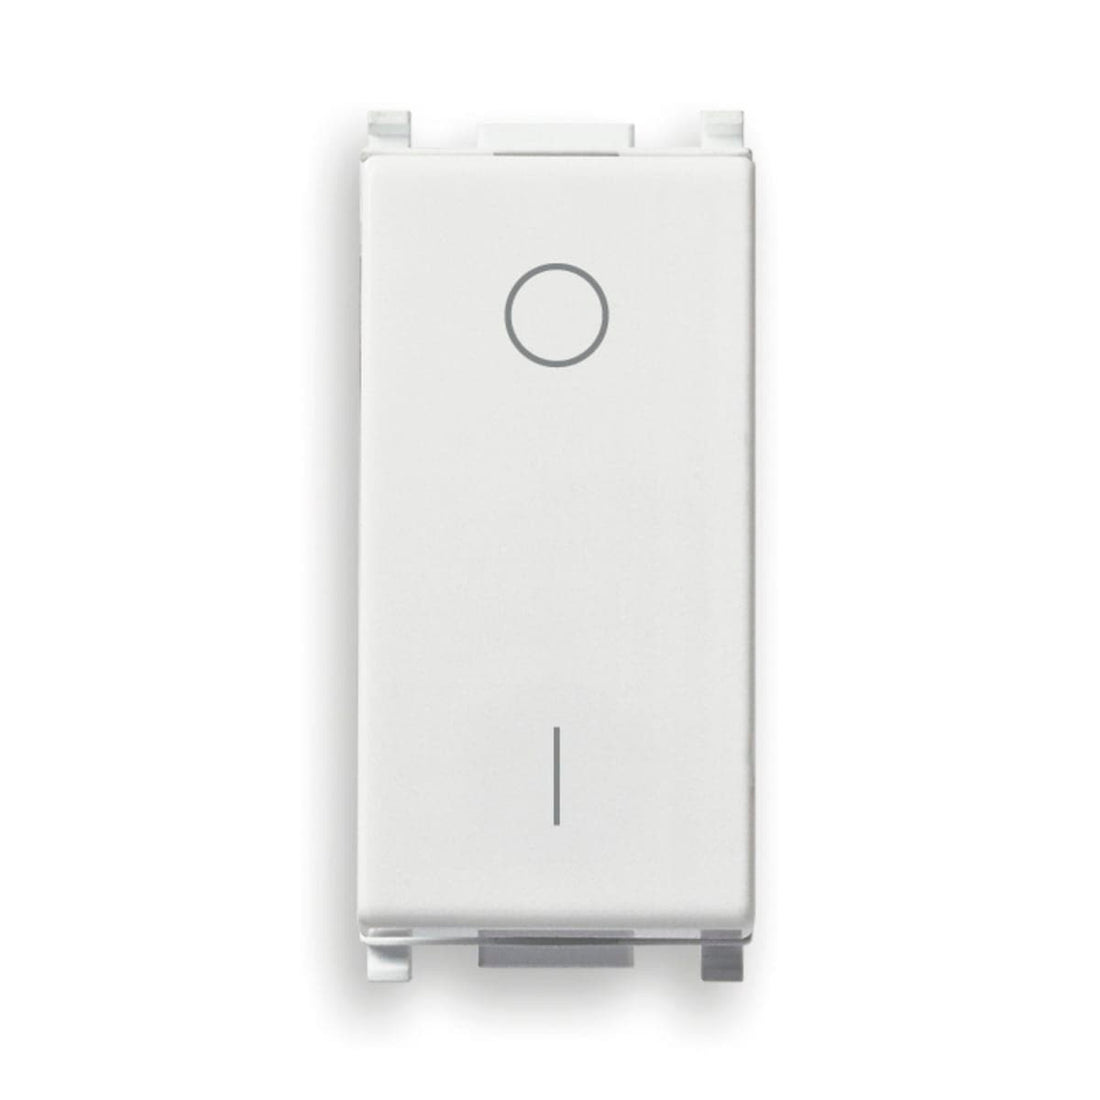 PLANA DOUBLE POLE SWITCH 16A WHITE - best price from Maltashopper.com BR420100769